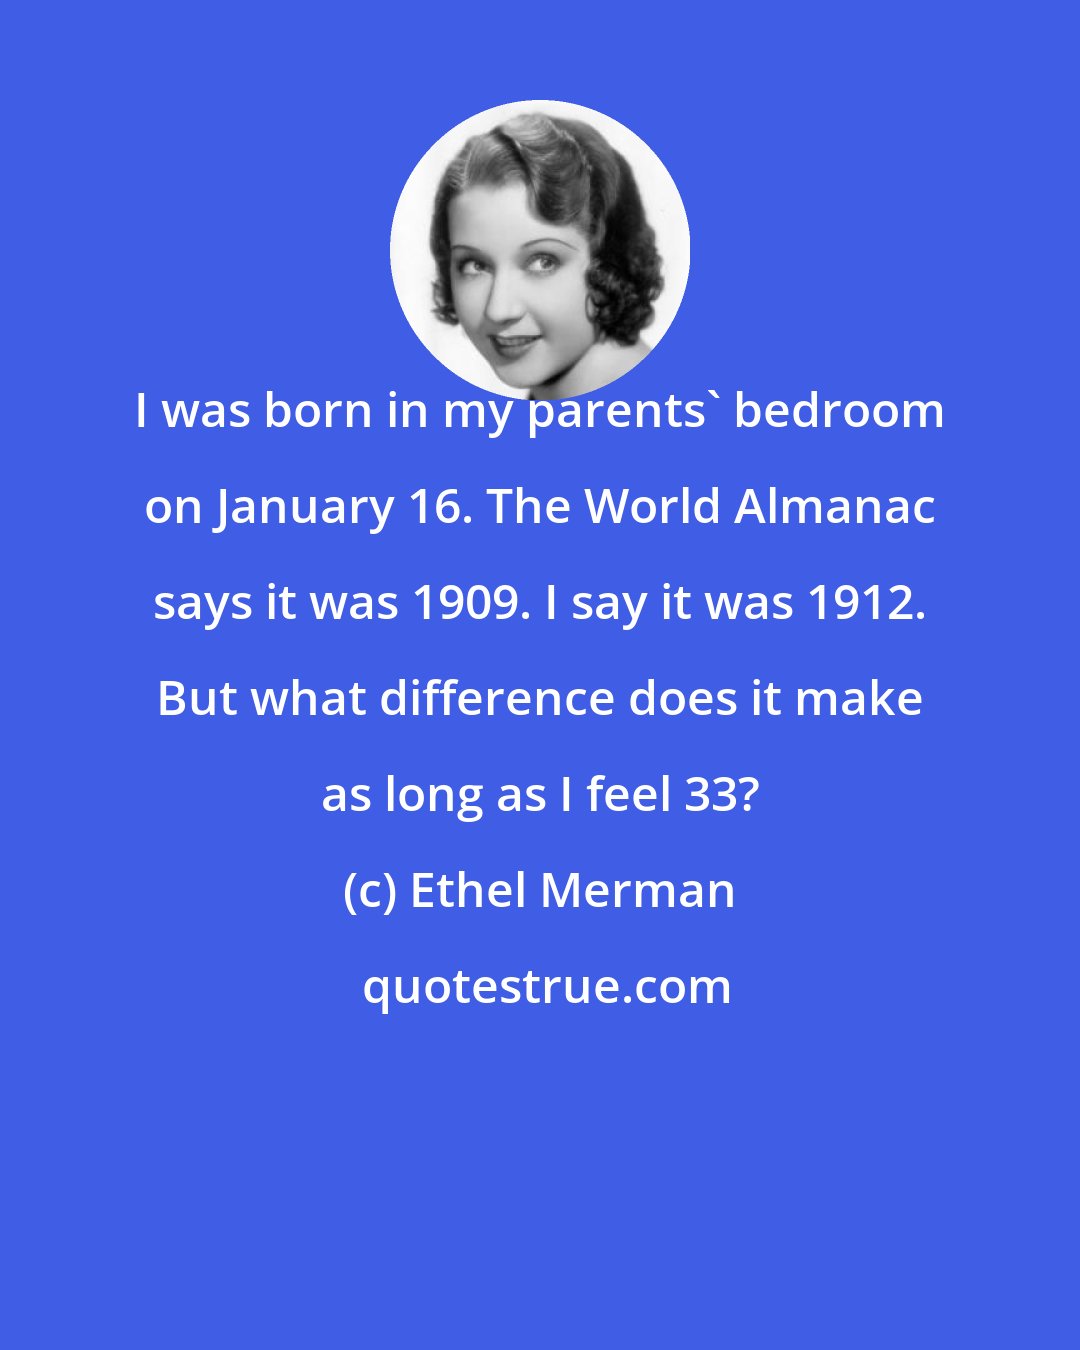 Ethel Merman: I was born in my parents' bedroom on January 16. The World Almanac says it was 1909. I say it was 1912. But what difference does it make as long as I feel 33?